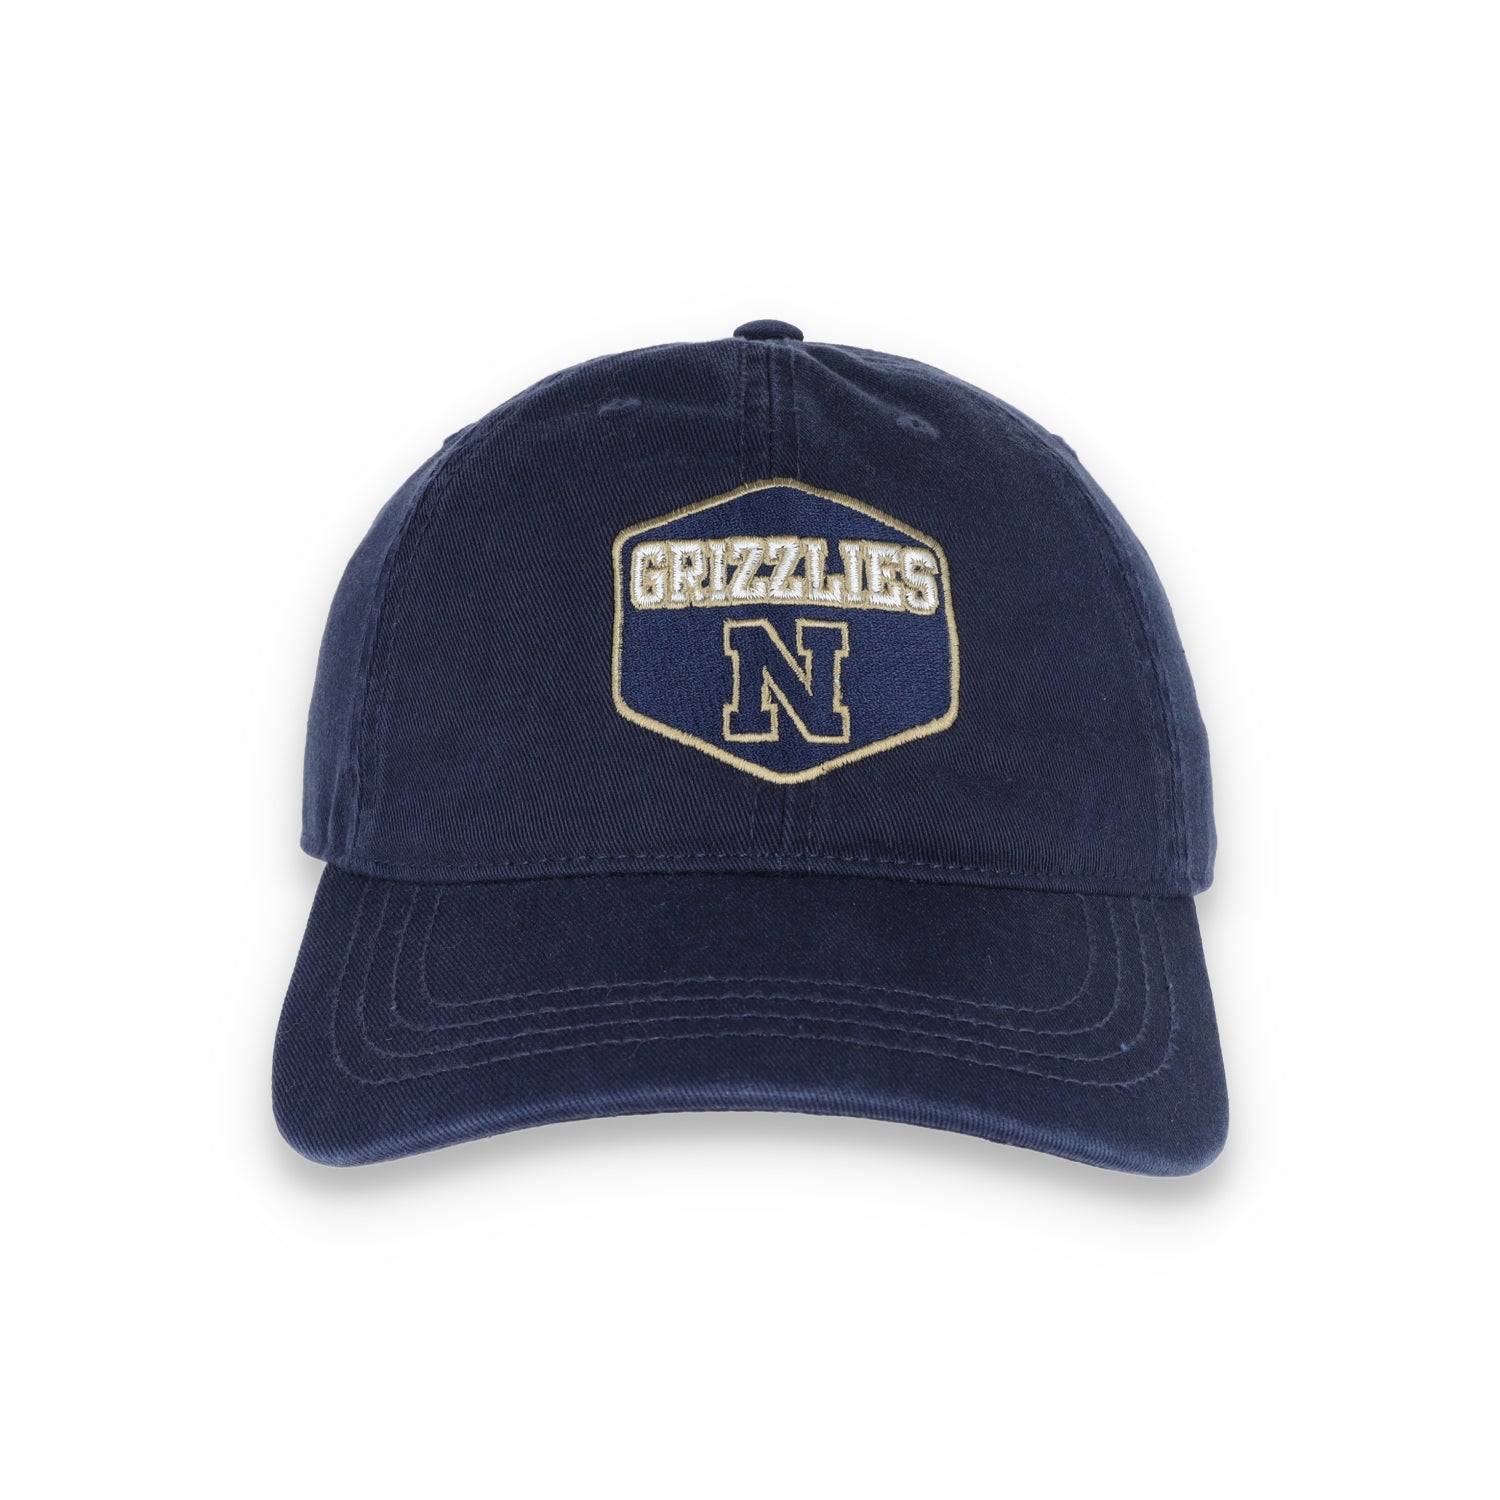 Napa High Grizzlies Relaxed Adjustable Cap-Navy